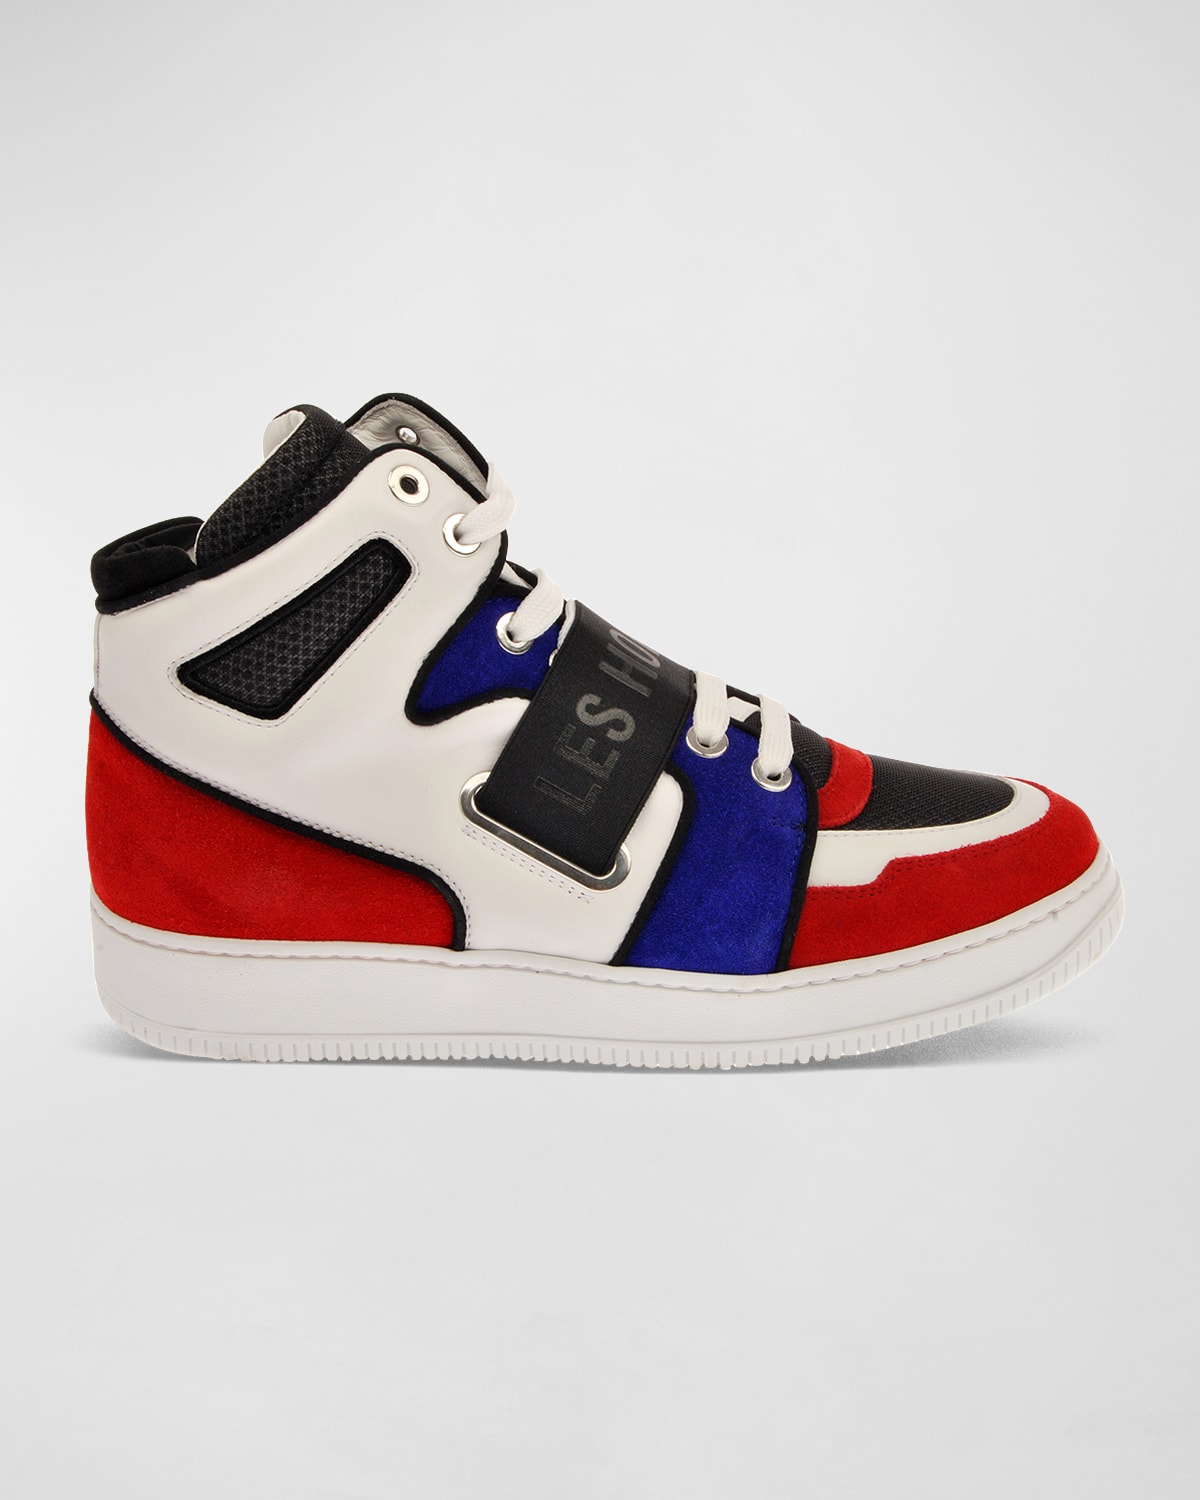 Les Hommes Men's Mix Media Logo High-top Sneakers In Red/blue/white